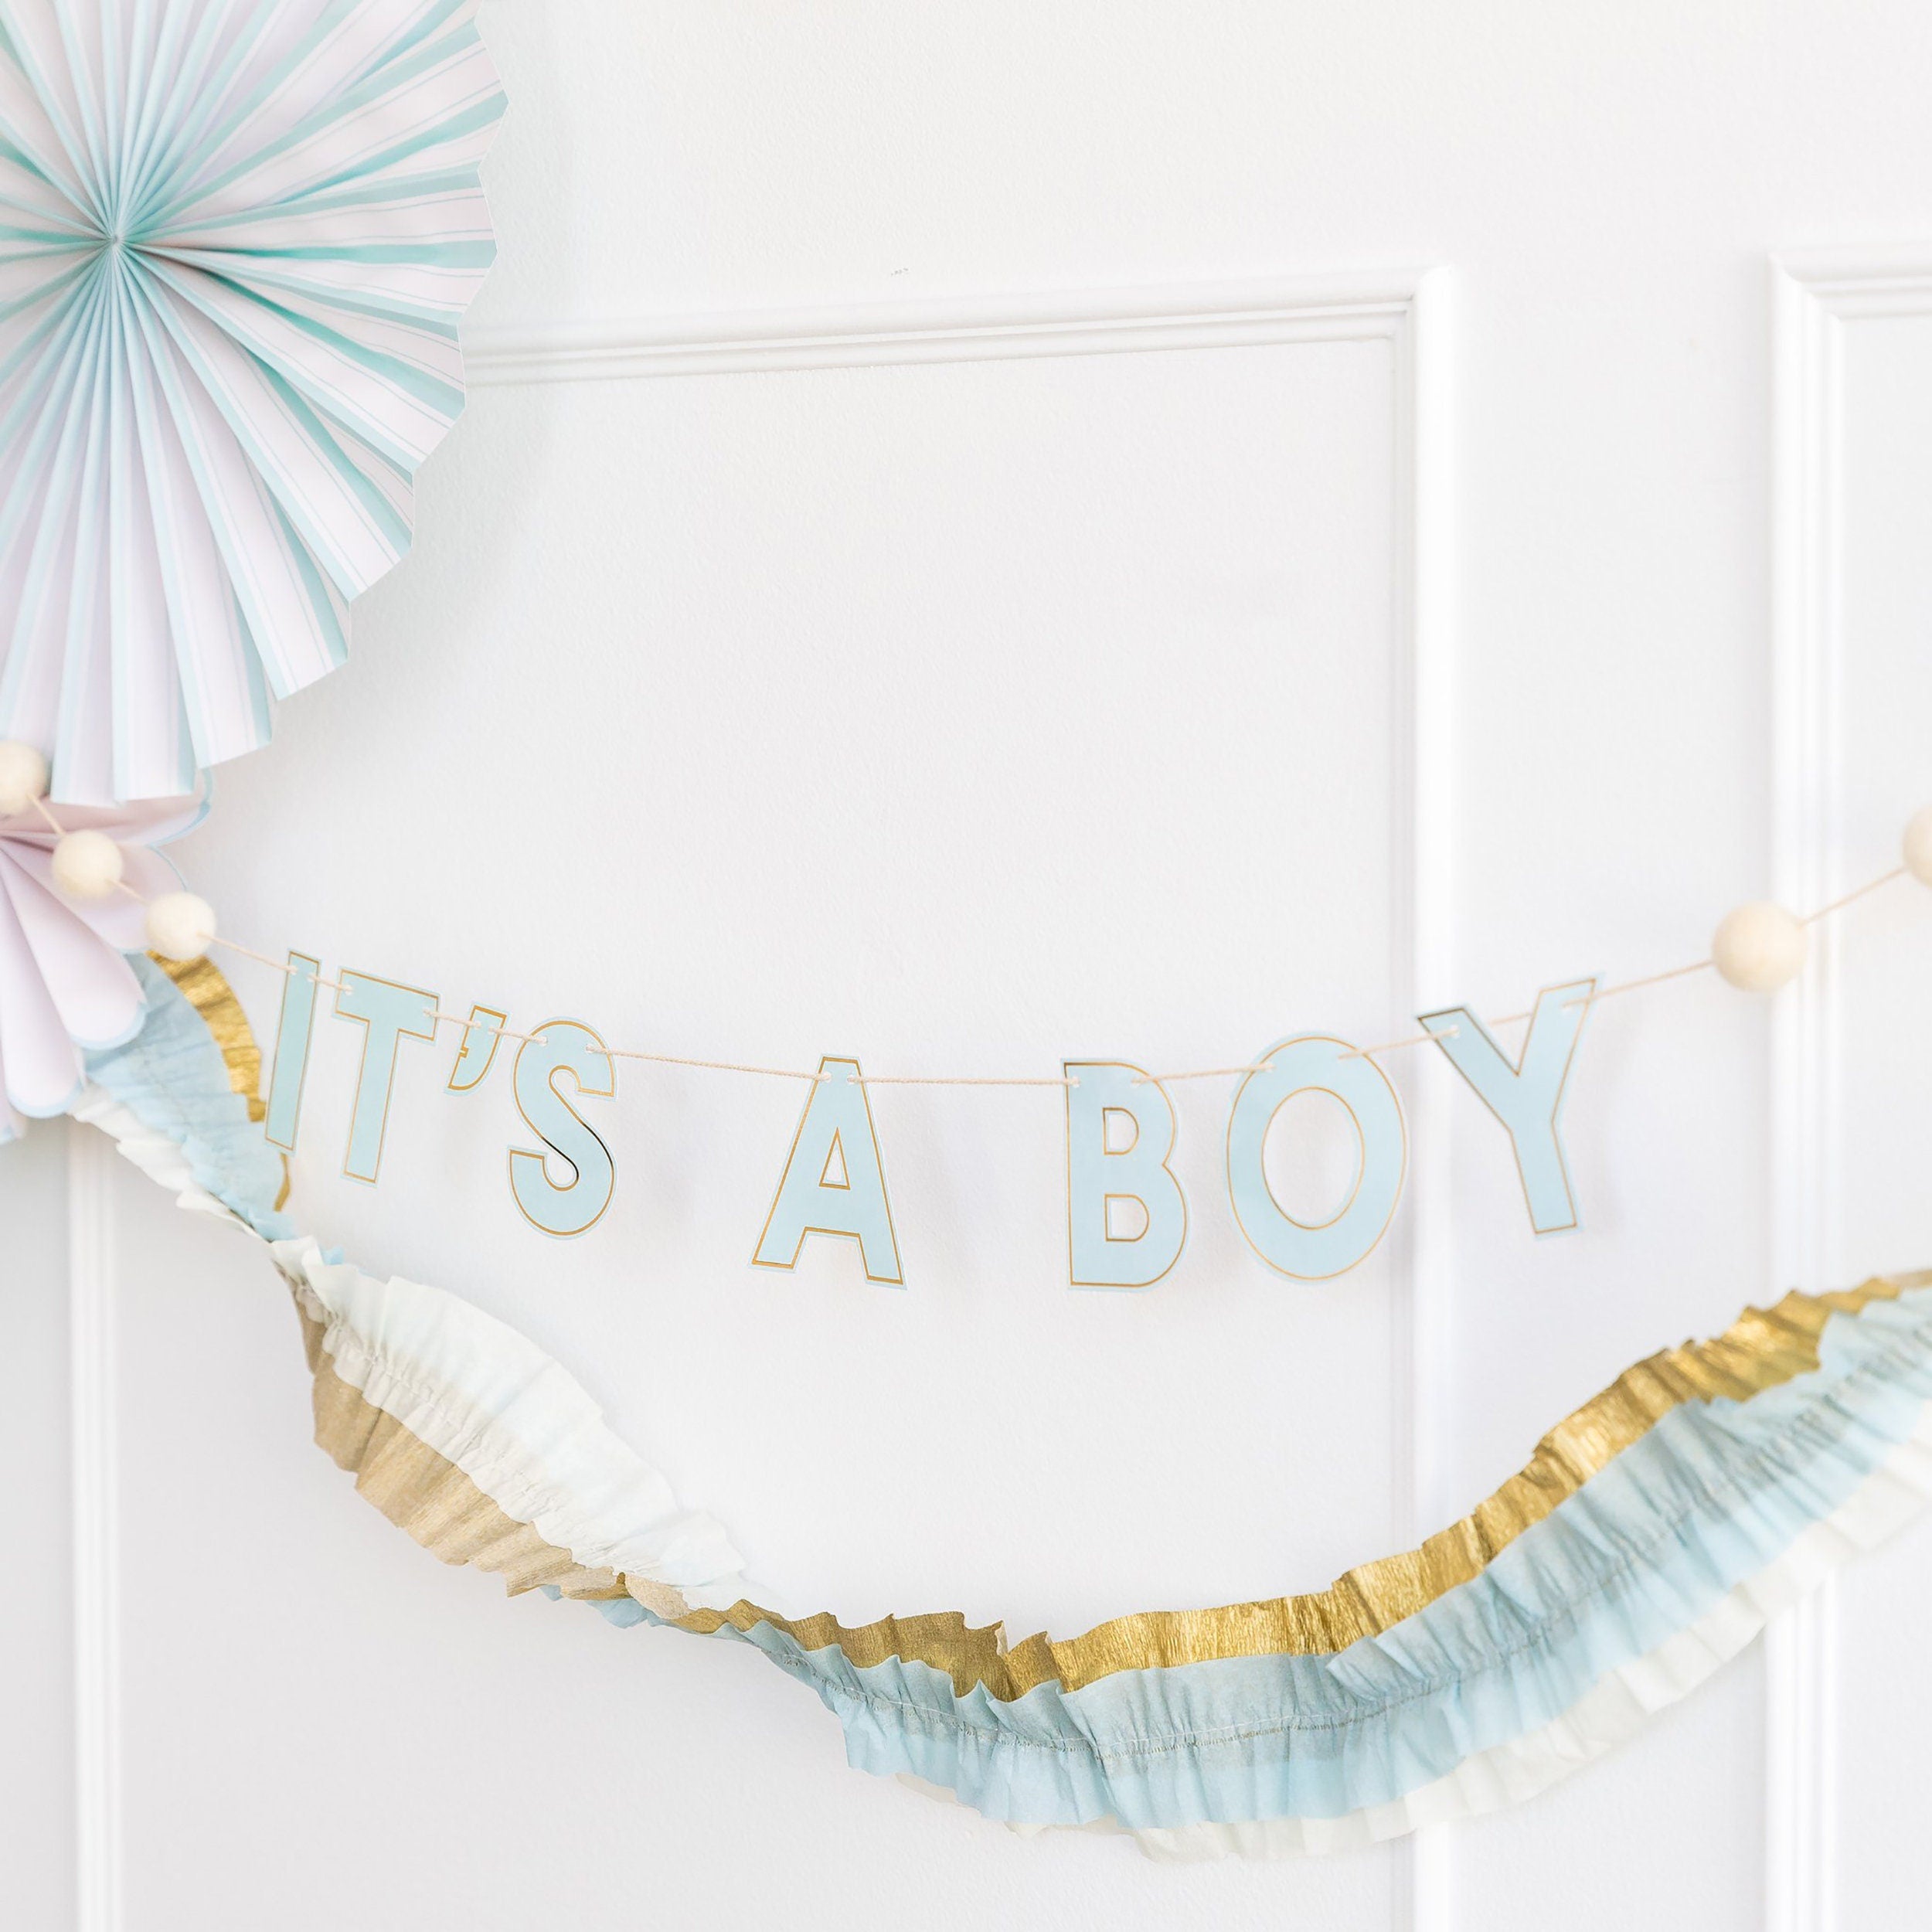 Its a Boy Banner | Baby Boy Banner - Baby Shower Decorations - Baby Shower Banner - Its a Boy Baby Shower - Baby Shower Party Supplies